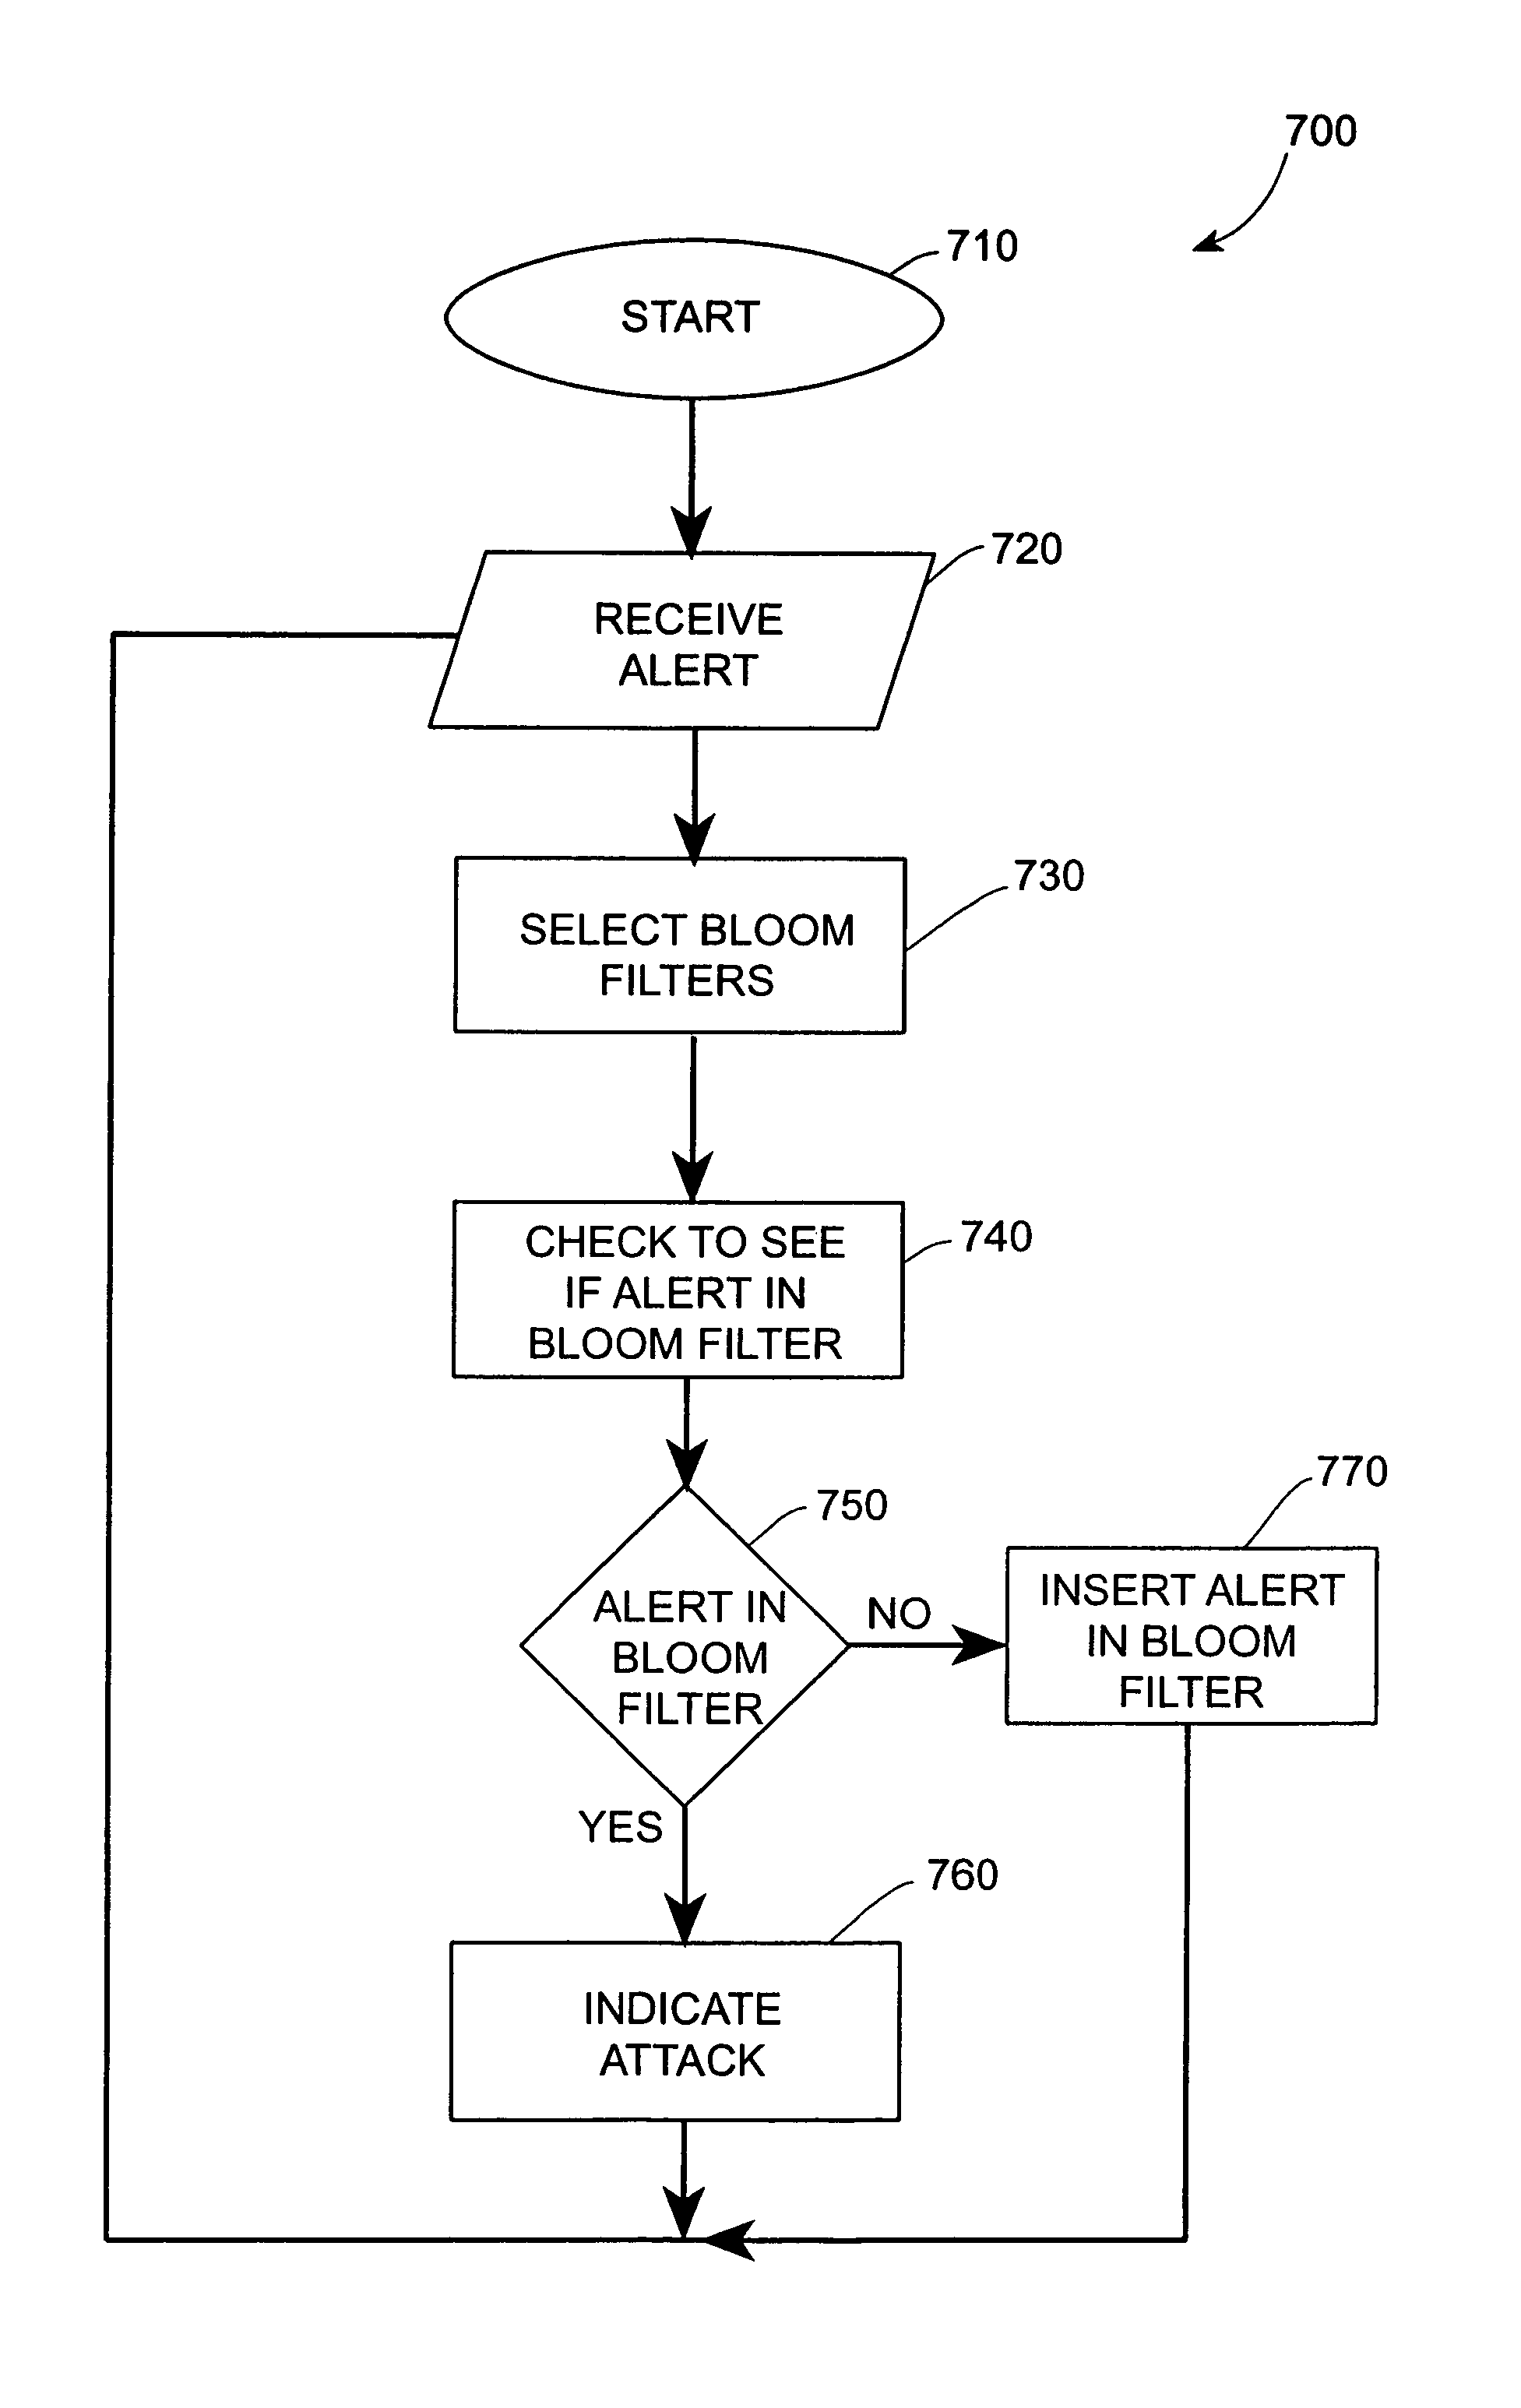 Systems and methods for correlating and distributing intrusion alert information among collaborating computer systems